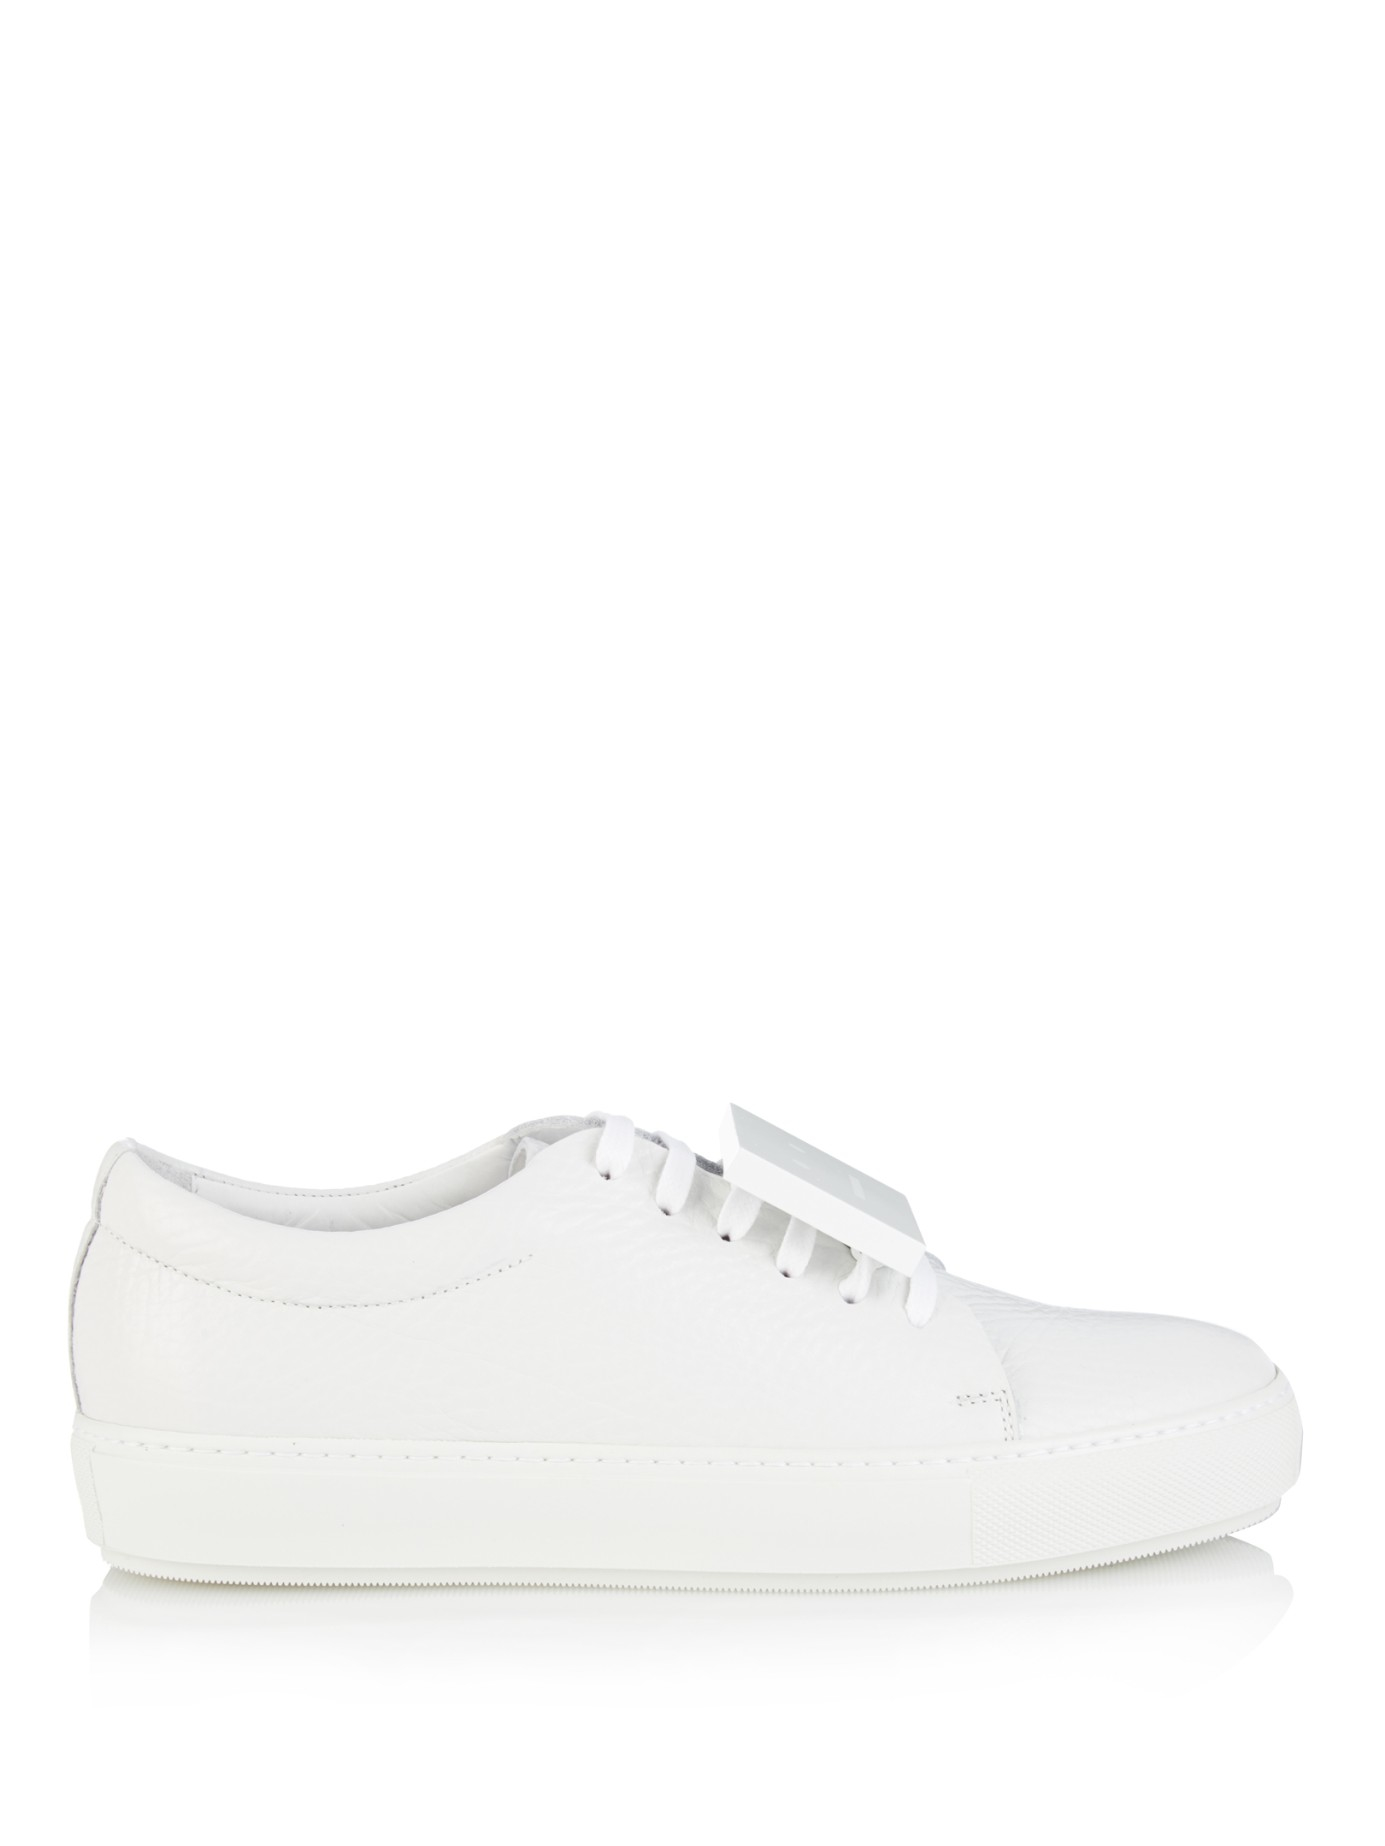 Acne Studios Adriana Smiley-Face Grained-Leather Sneakers in White | Lyst